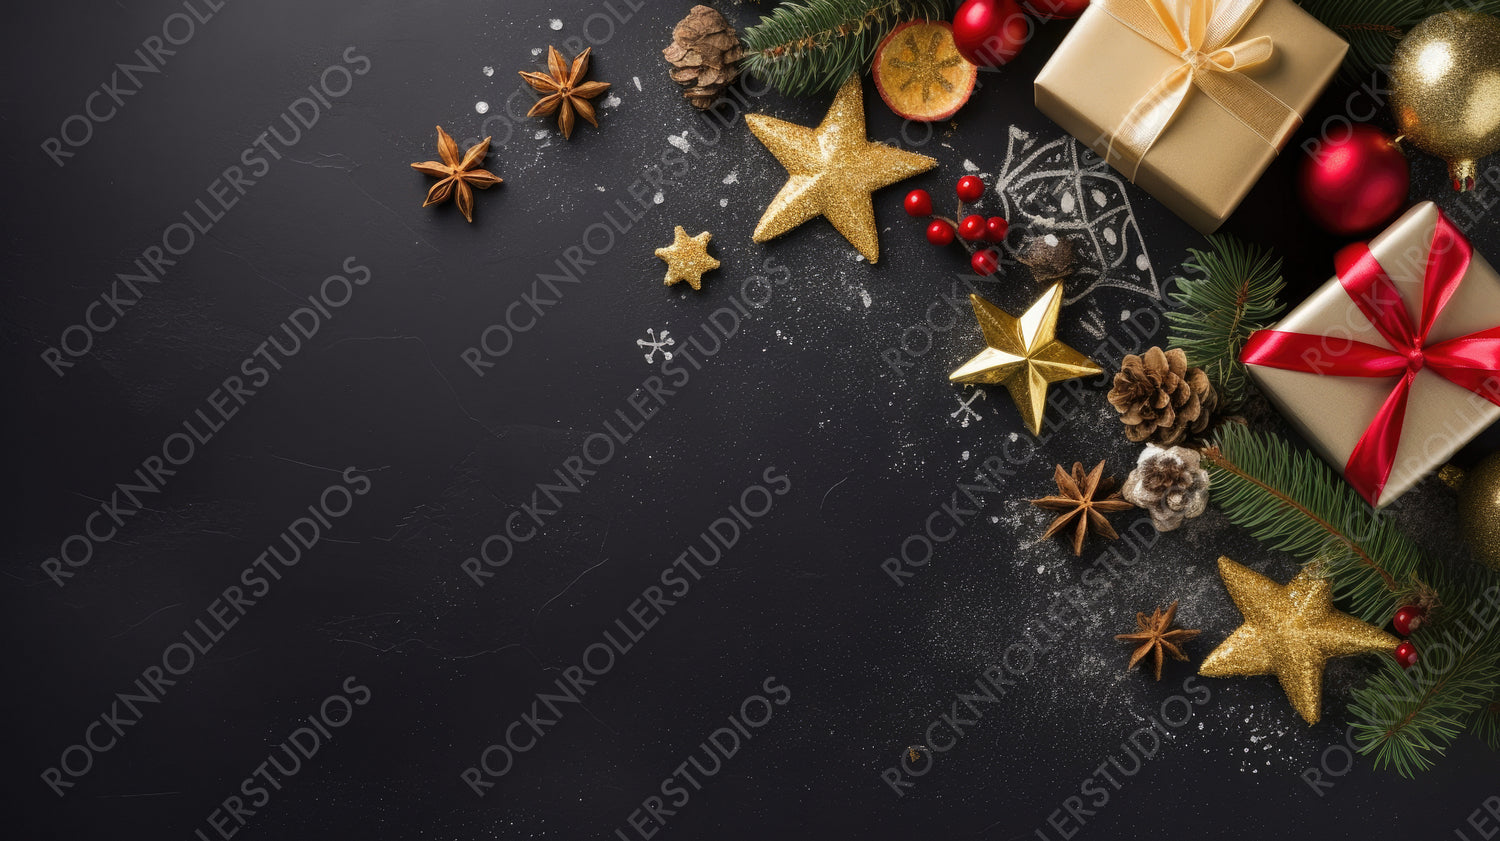 Christmas dark black background with beautiful texture and Golden gift box with red ribbon, fir branches, cones, stars, top view, copy space.